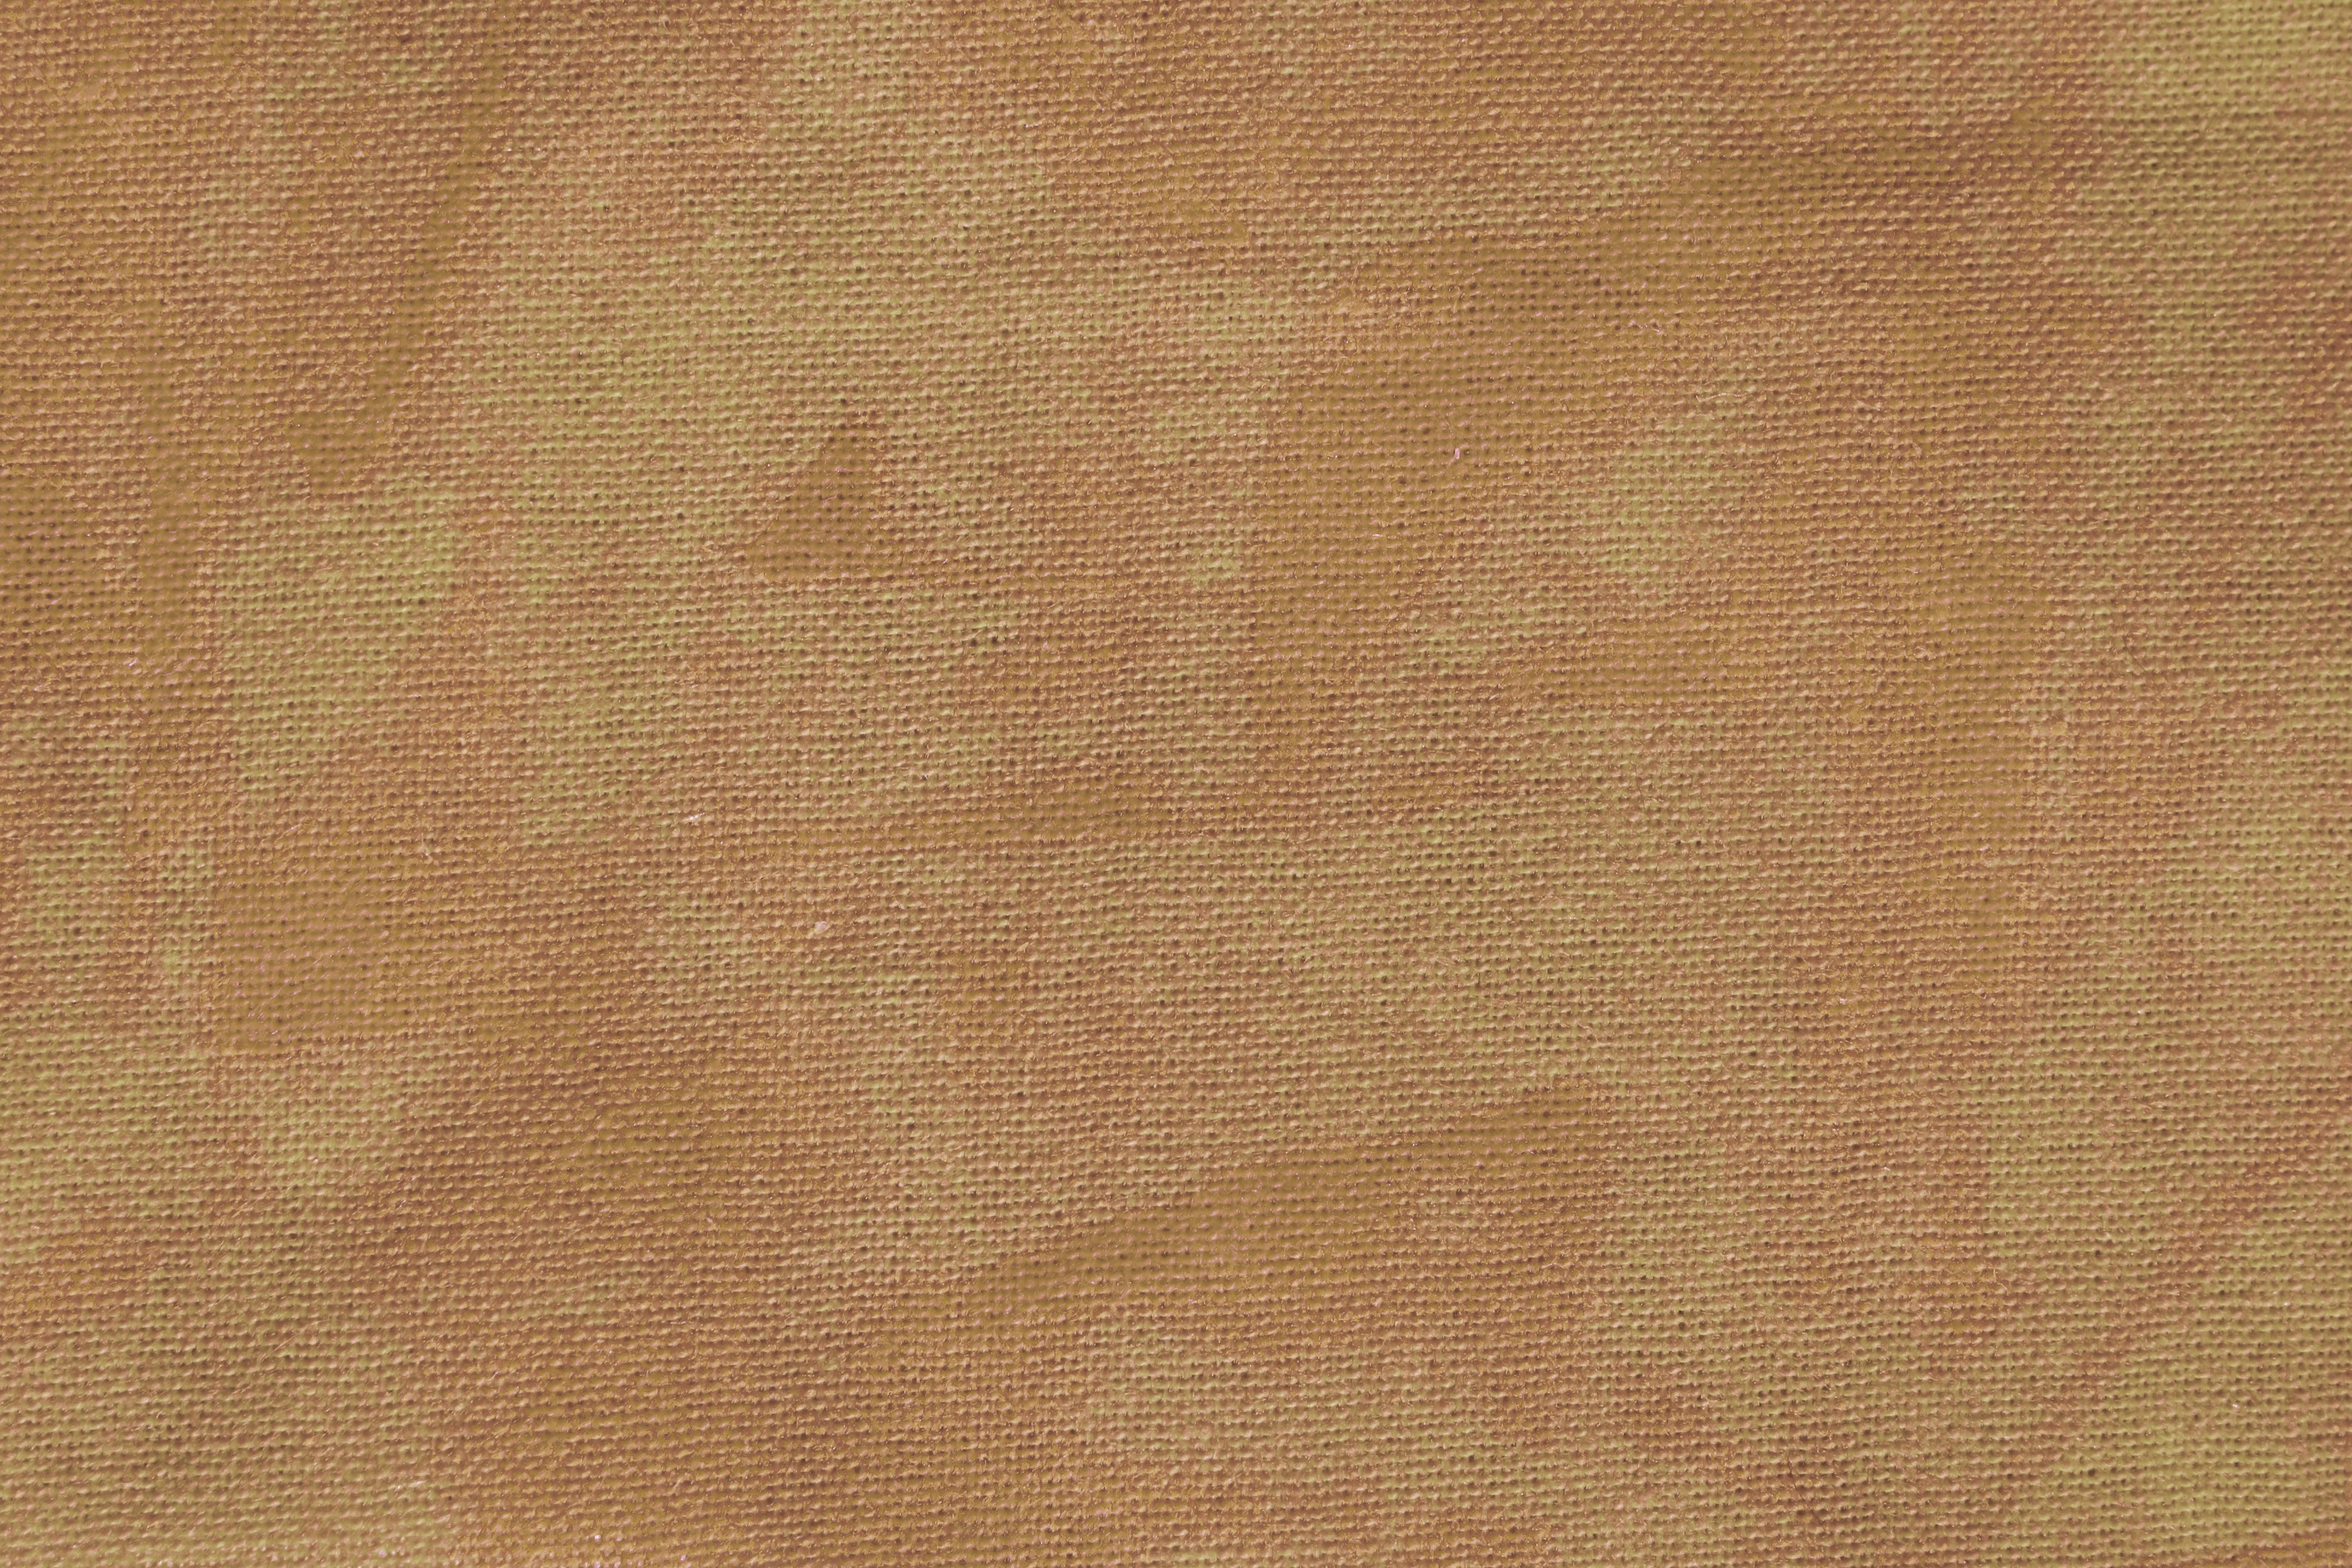 Tan Mottled Fabric Texture Picture Free Photograph HD Wallpapers Download Free Images Wallpaper [wallpaper981.blogspot.com]